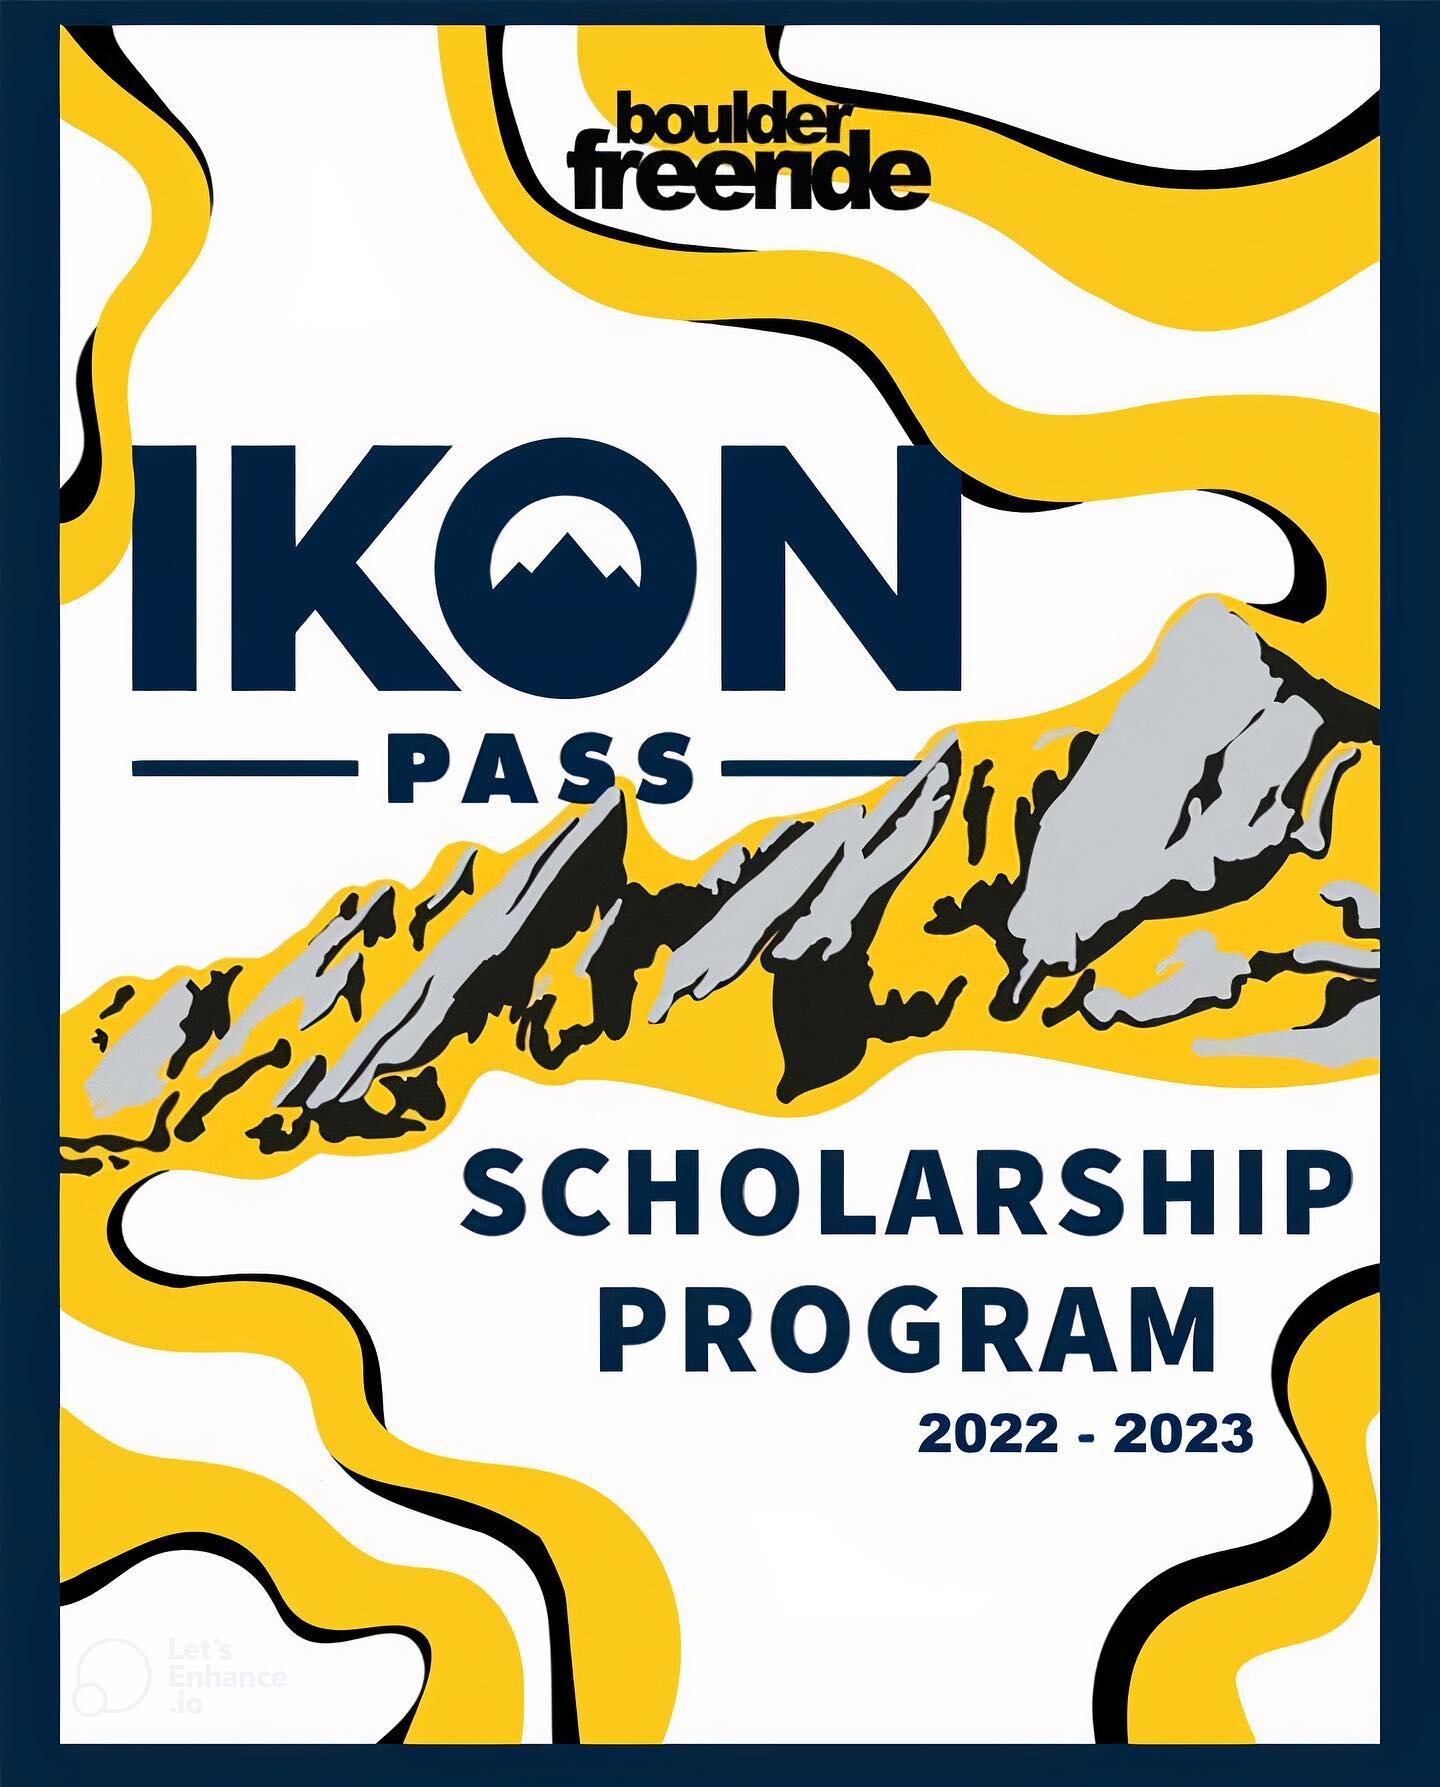 HOWDY FRIENDS! 
We are very happy to be opening up our 2022 - 2023 IKON Pass Scholarship!!! 
This is a financial need-based scholarship for ALL CU students. You do not have to be a Boulder Freeride member! 
Click the link in our bio to fill out the o